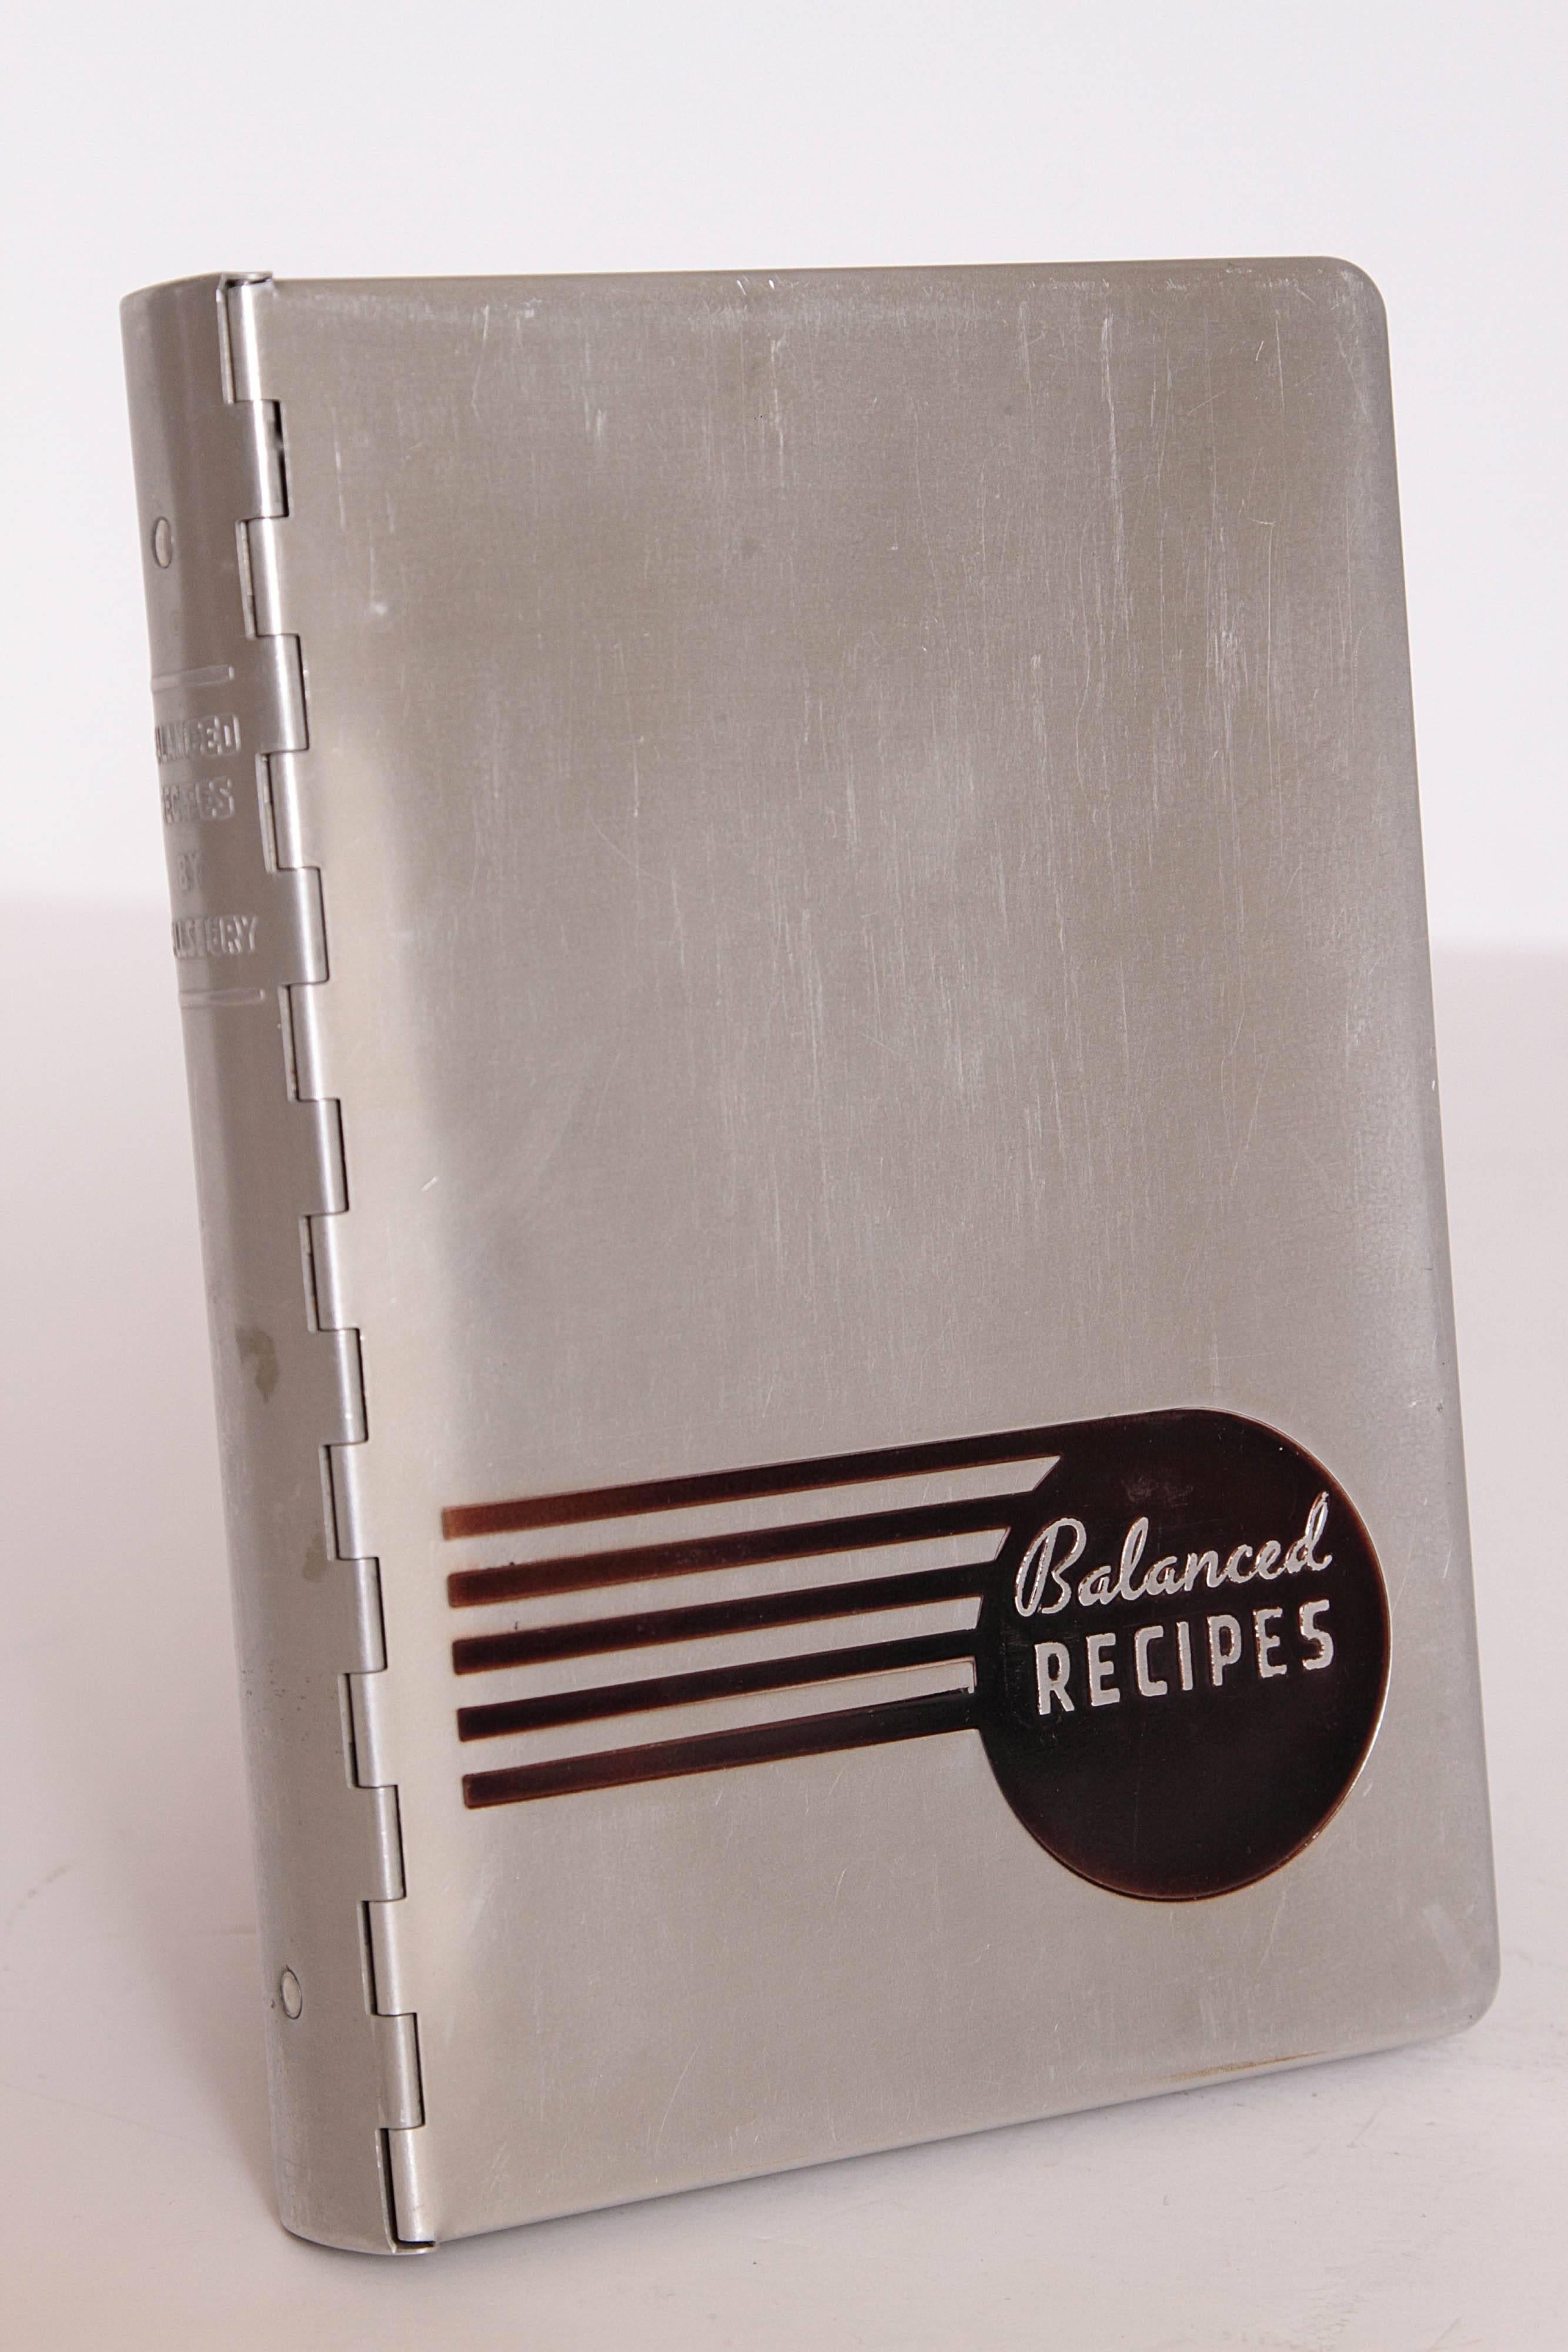 Tabbed cookbook in a streamline hinged-aluminum case. The cookbook has an eleven-ring Binder with recipes in tabbed sections from desserts to main dishes, printed on overlapping slips of various sizes. Published in 1933, in conjunction with